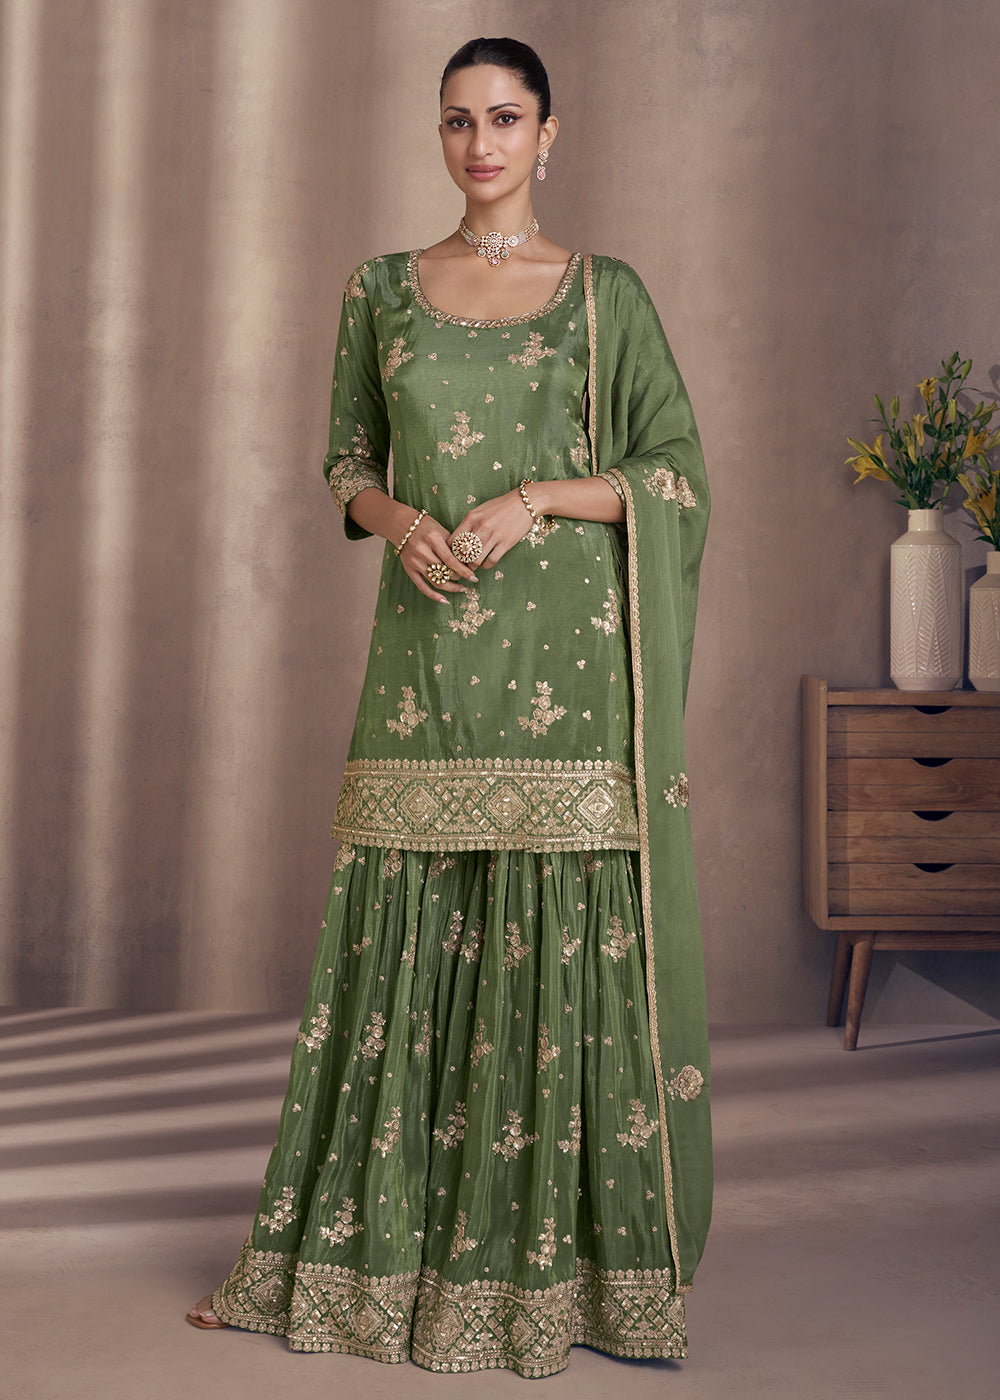 Shop Now Moss Green Embroidered Chinnon Silk Designer Sharara Suit Online at Empress Clothing in USA, UK, Canada, Italy & Worldwide.